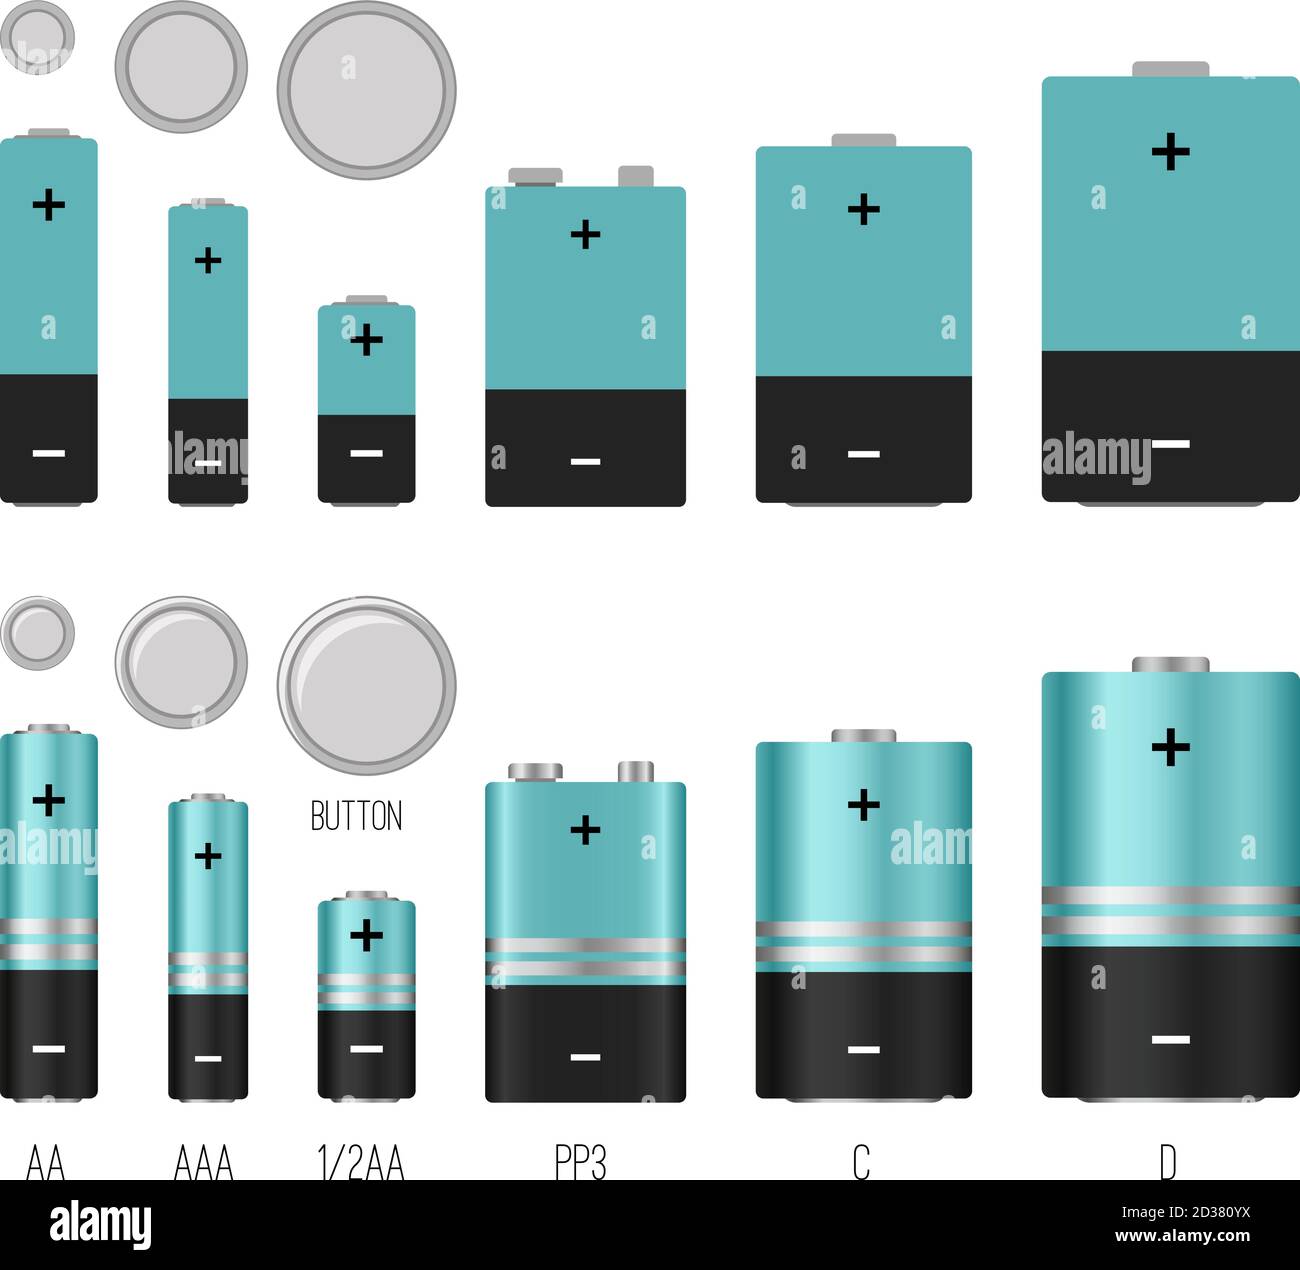 Battery size illustration. Batteries sizes vector image isolated, batterys styles, different batterie electronic industrial objects, lithium chemical electrical componenets Stock Vector